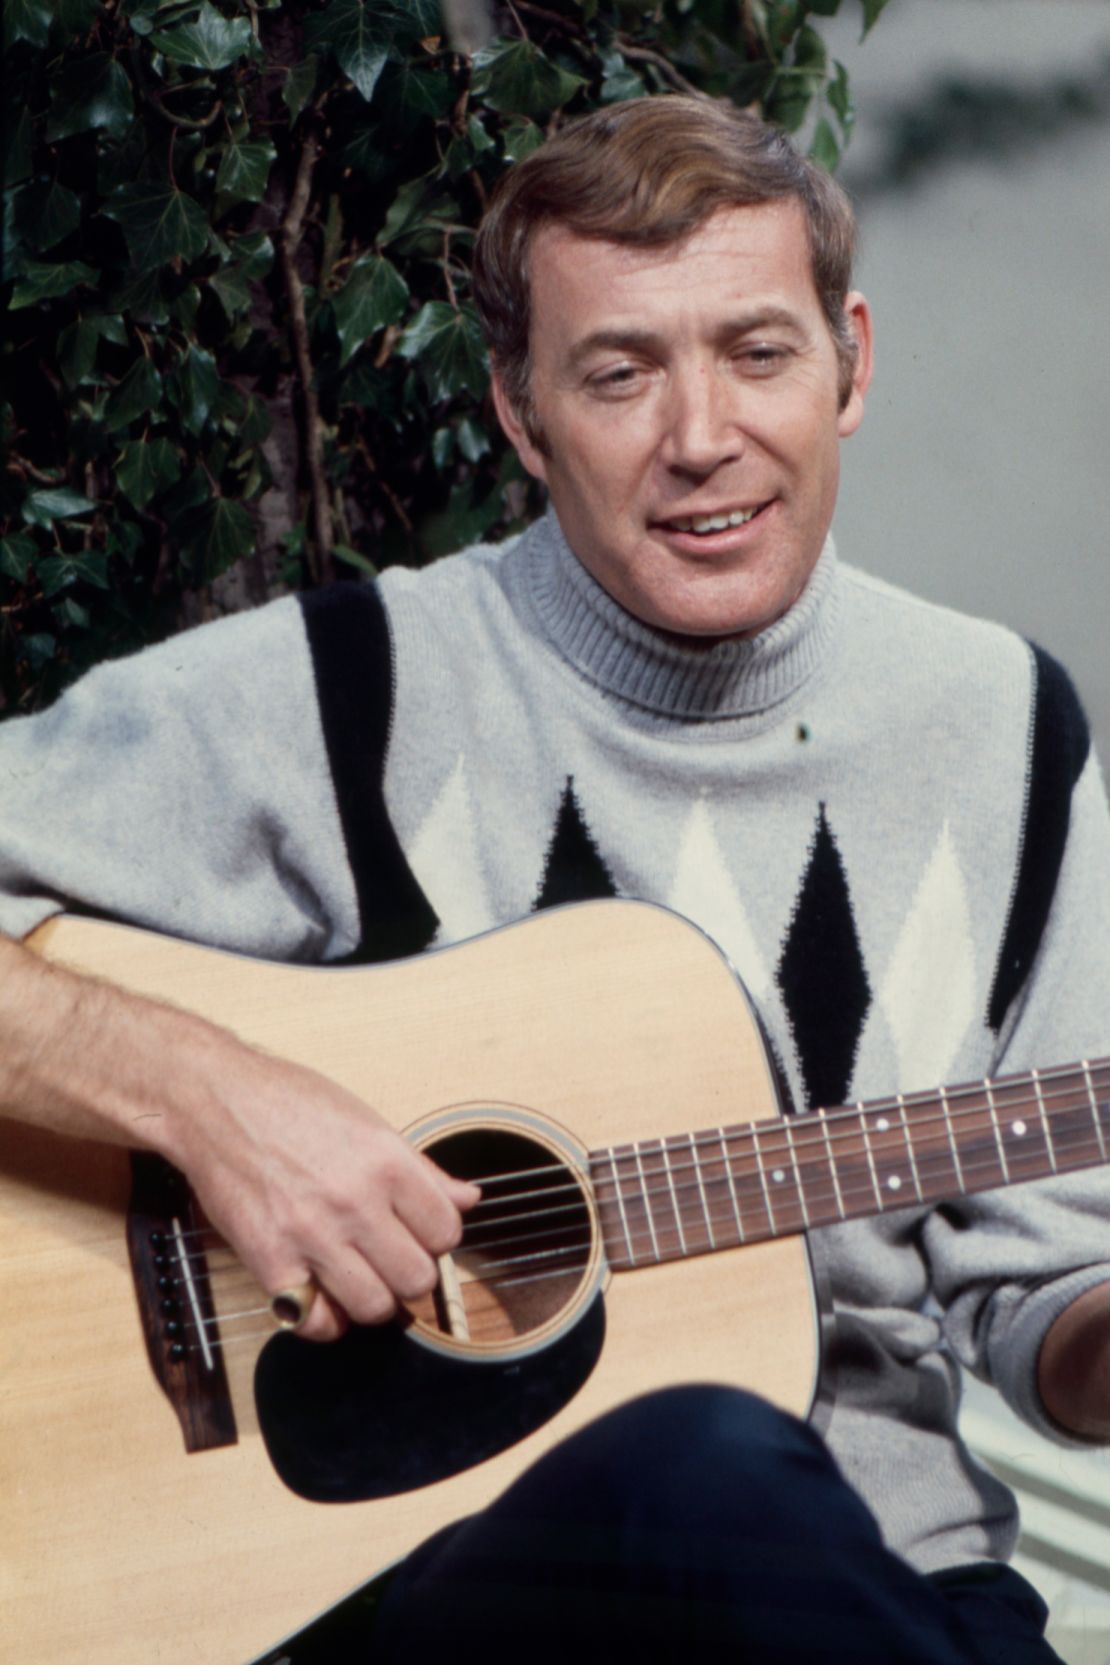 Val Doonican performing in a festive sweater on an episode of his ABC series "The Val Doonican Show" in 1971.